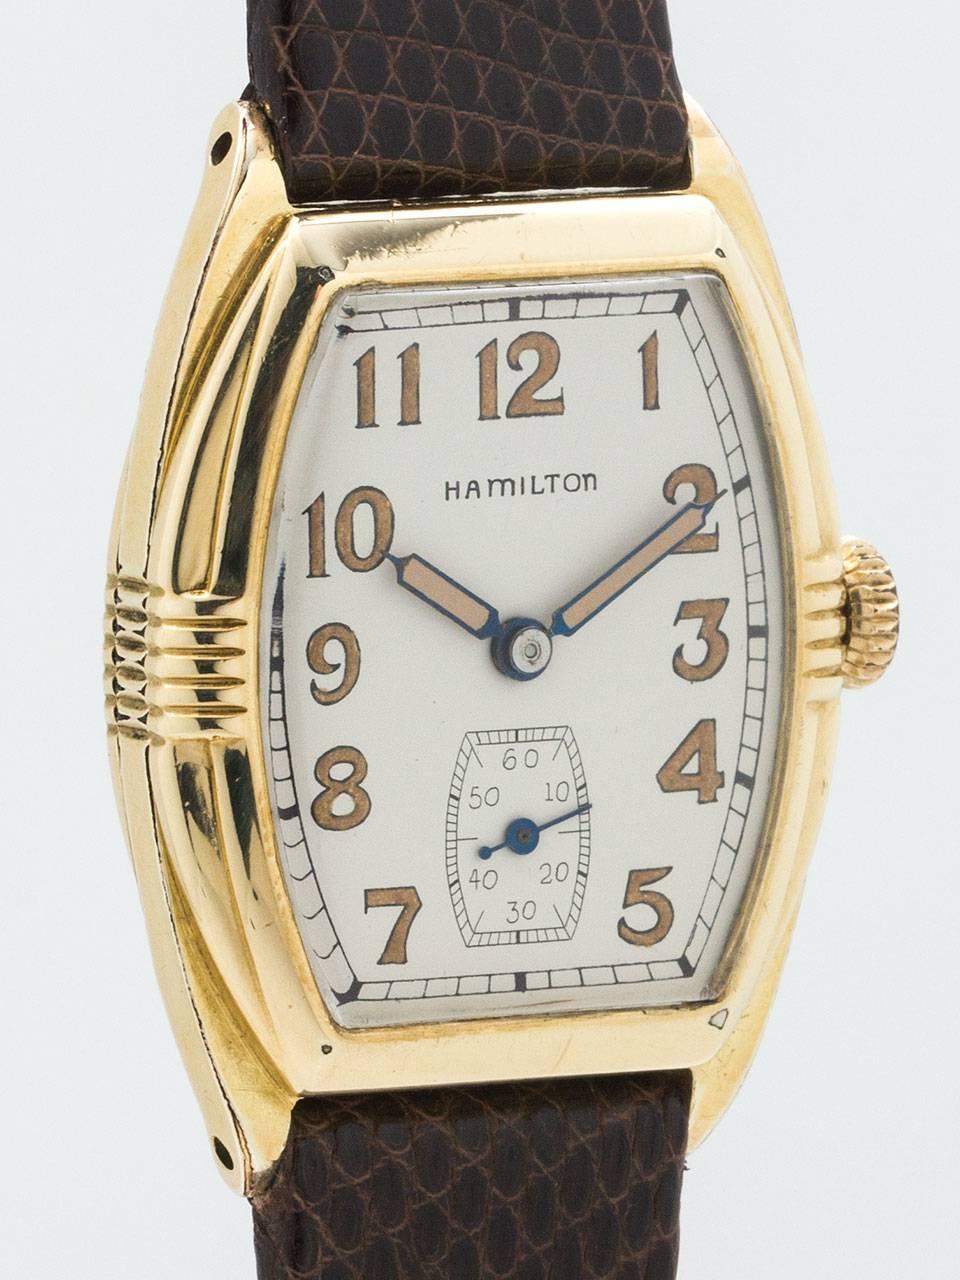 Vintage Hamilton Perry circa 1929. Featuring a distinctive yellow gold filled tonneau shaped case. classic art deco styled model with side flute pattern bi-secting the case. Very pleasing restored antique white dial with patina’d luminous indexes